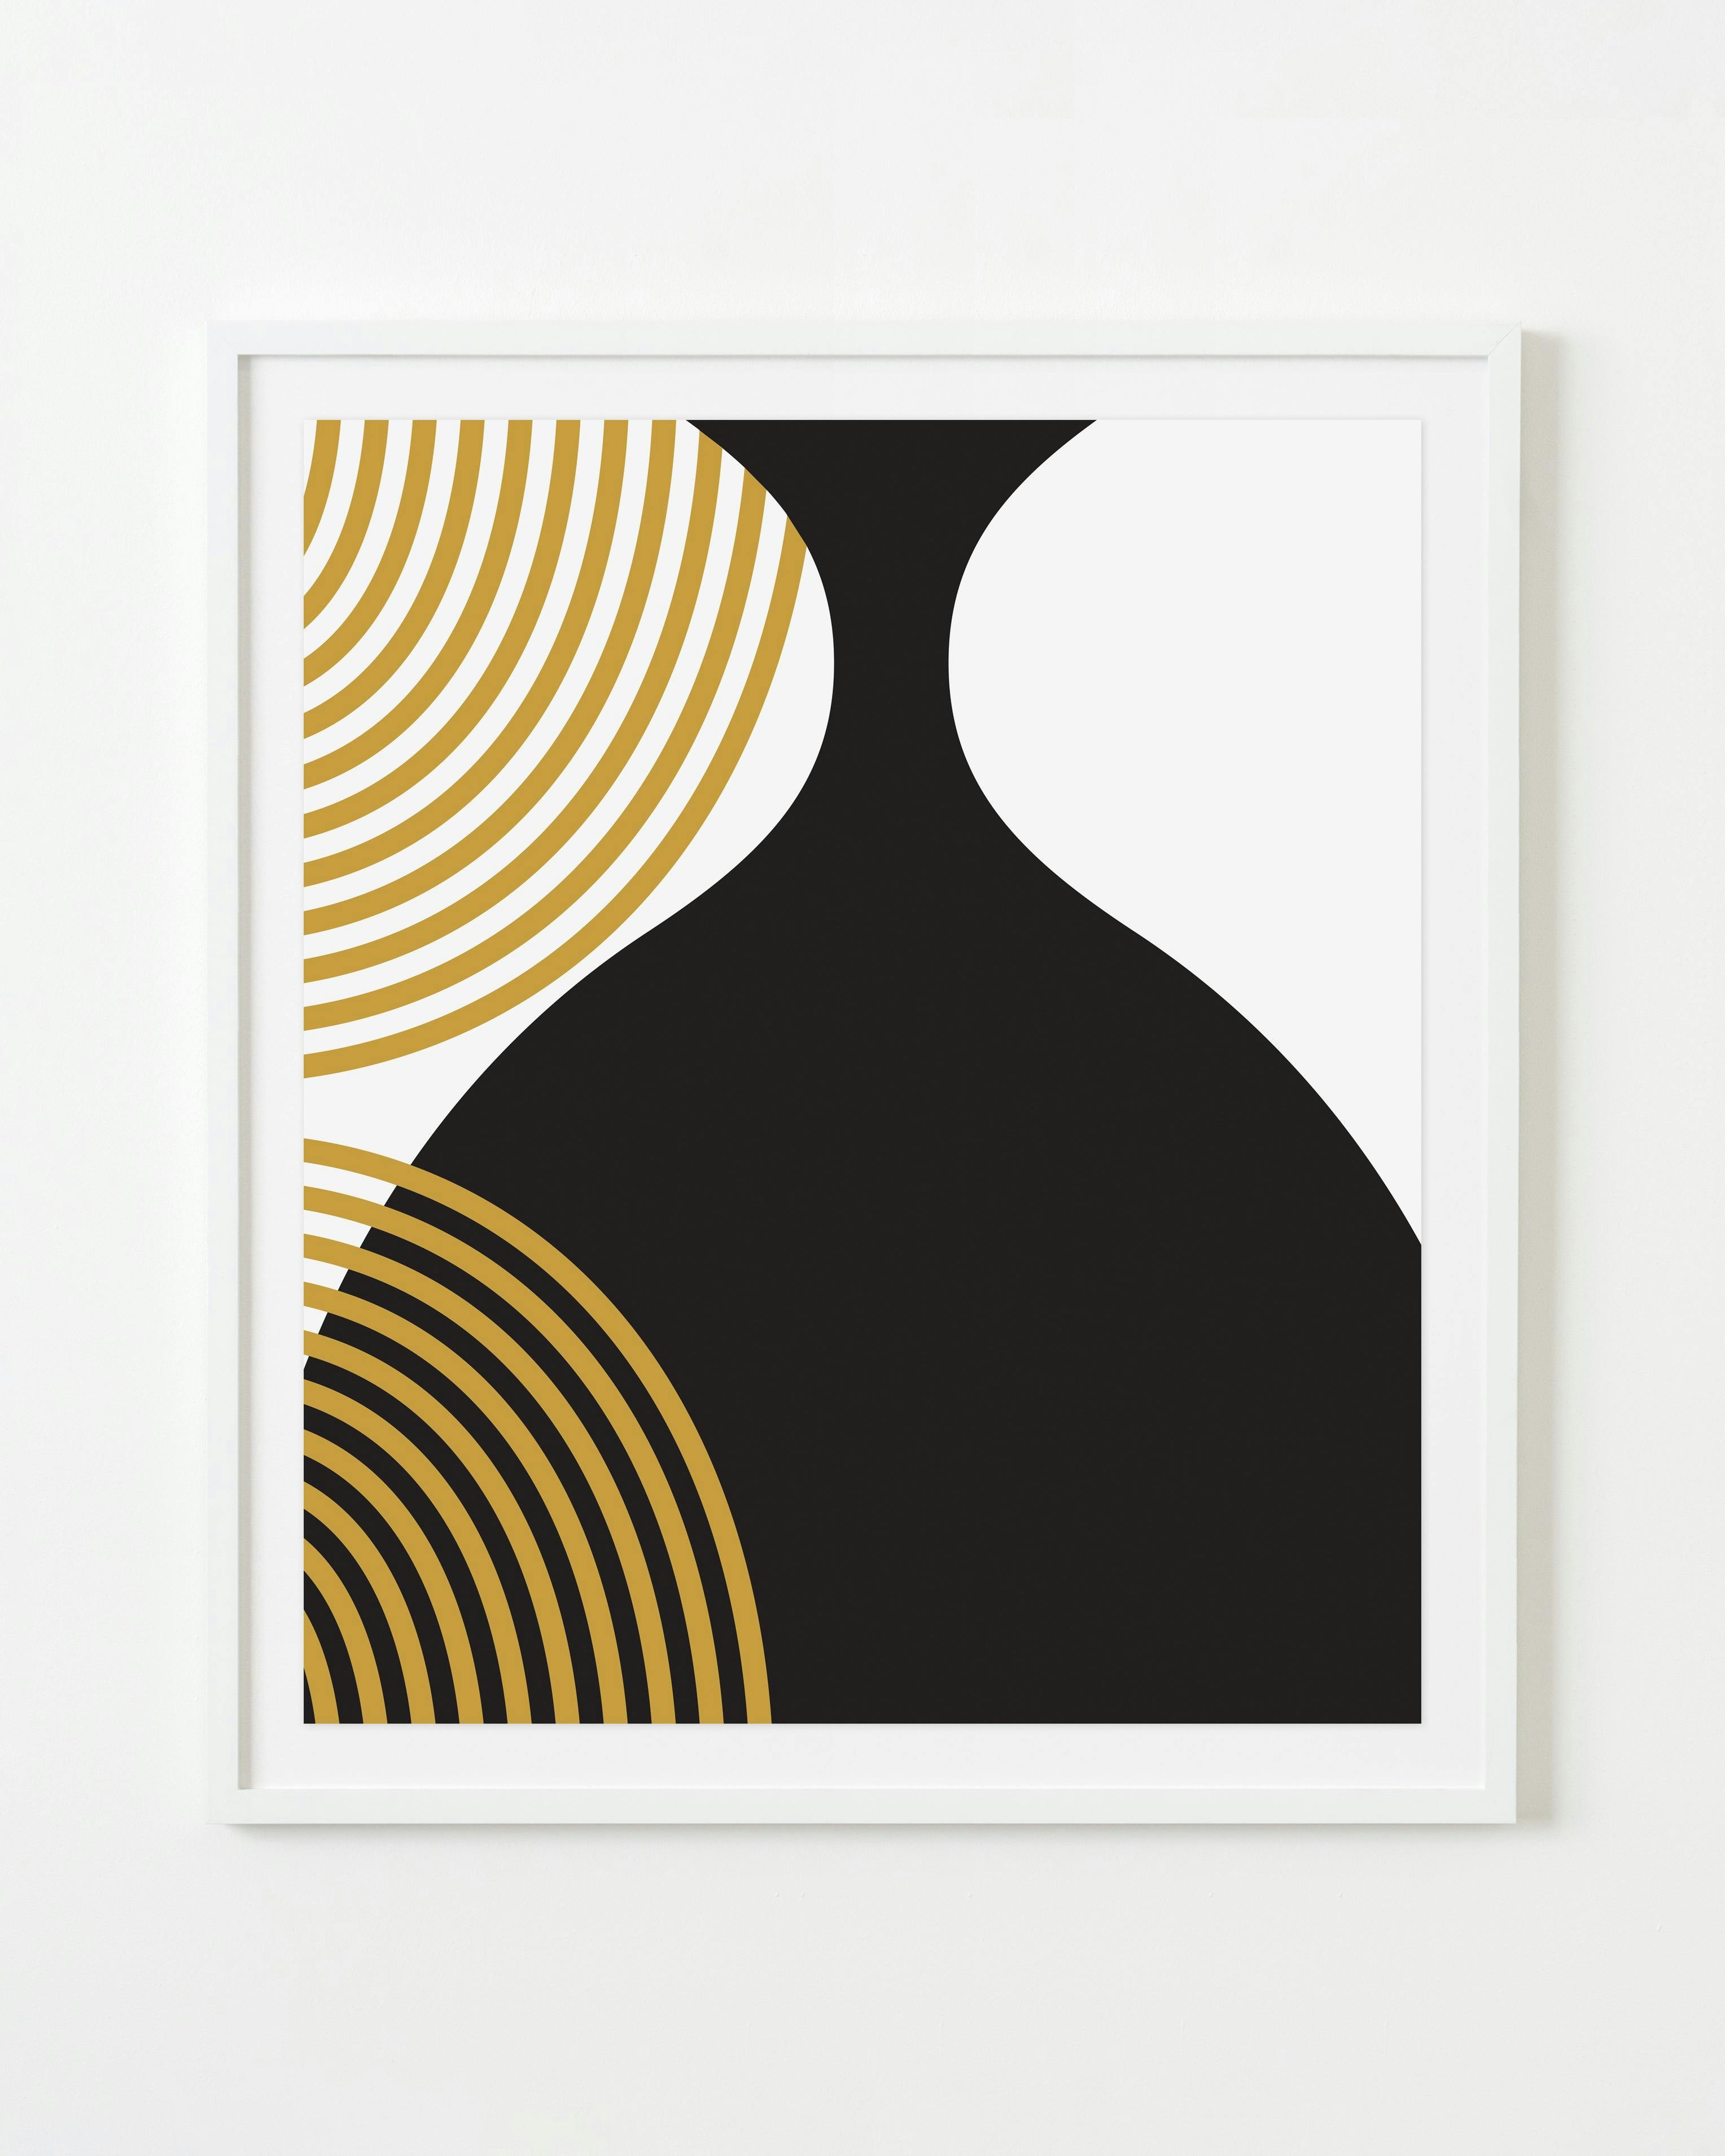 Lisa Hunt - Cross Sections: Untitled 7 (black and gold) - Print